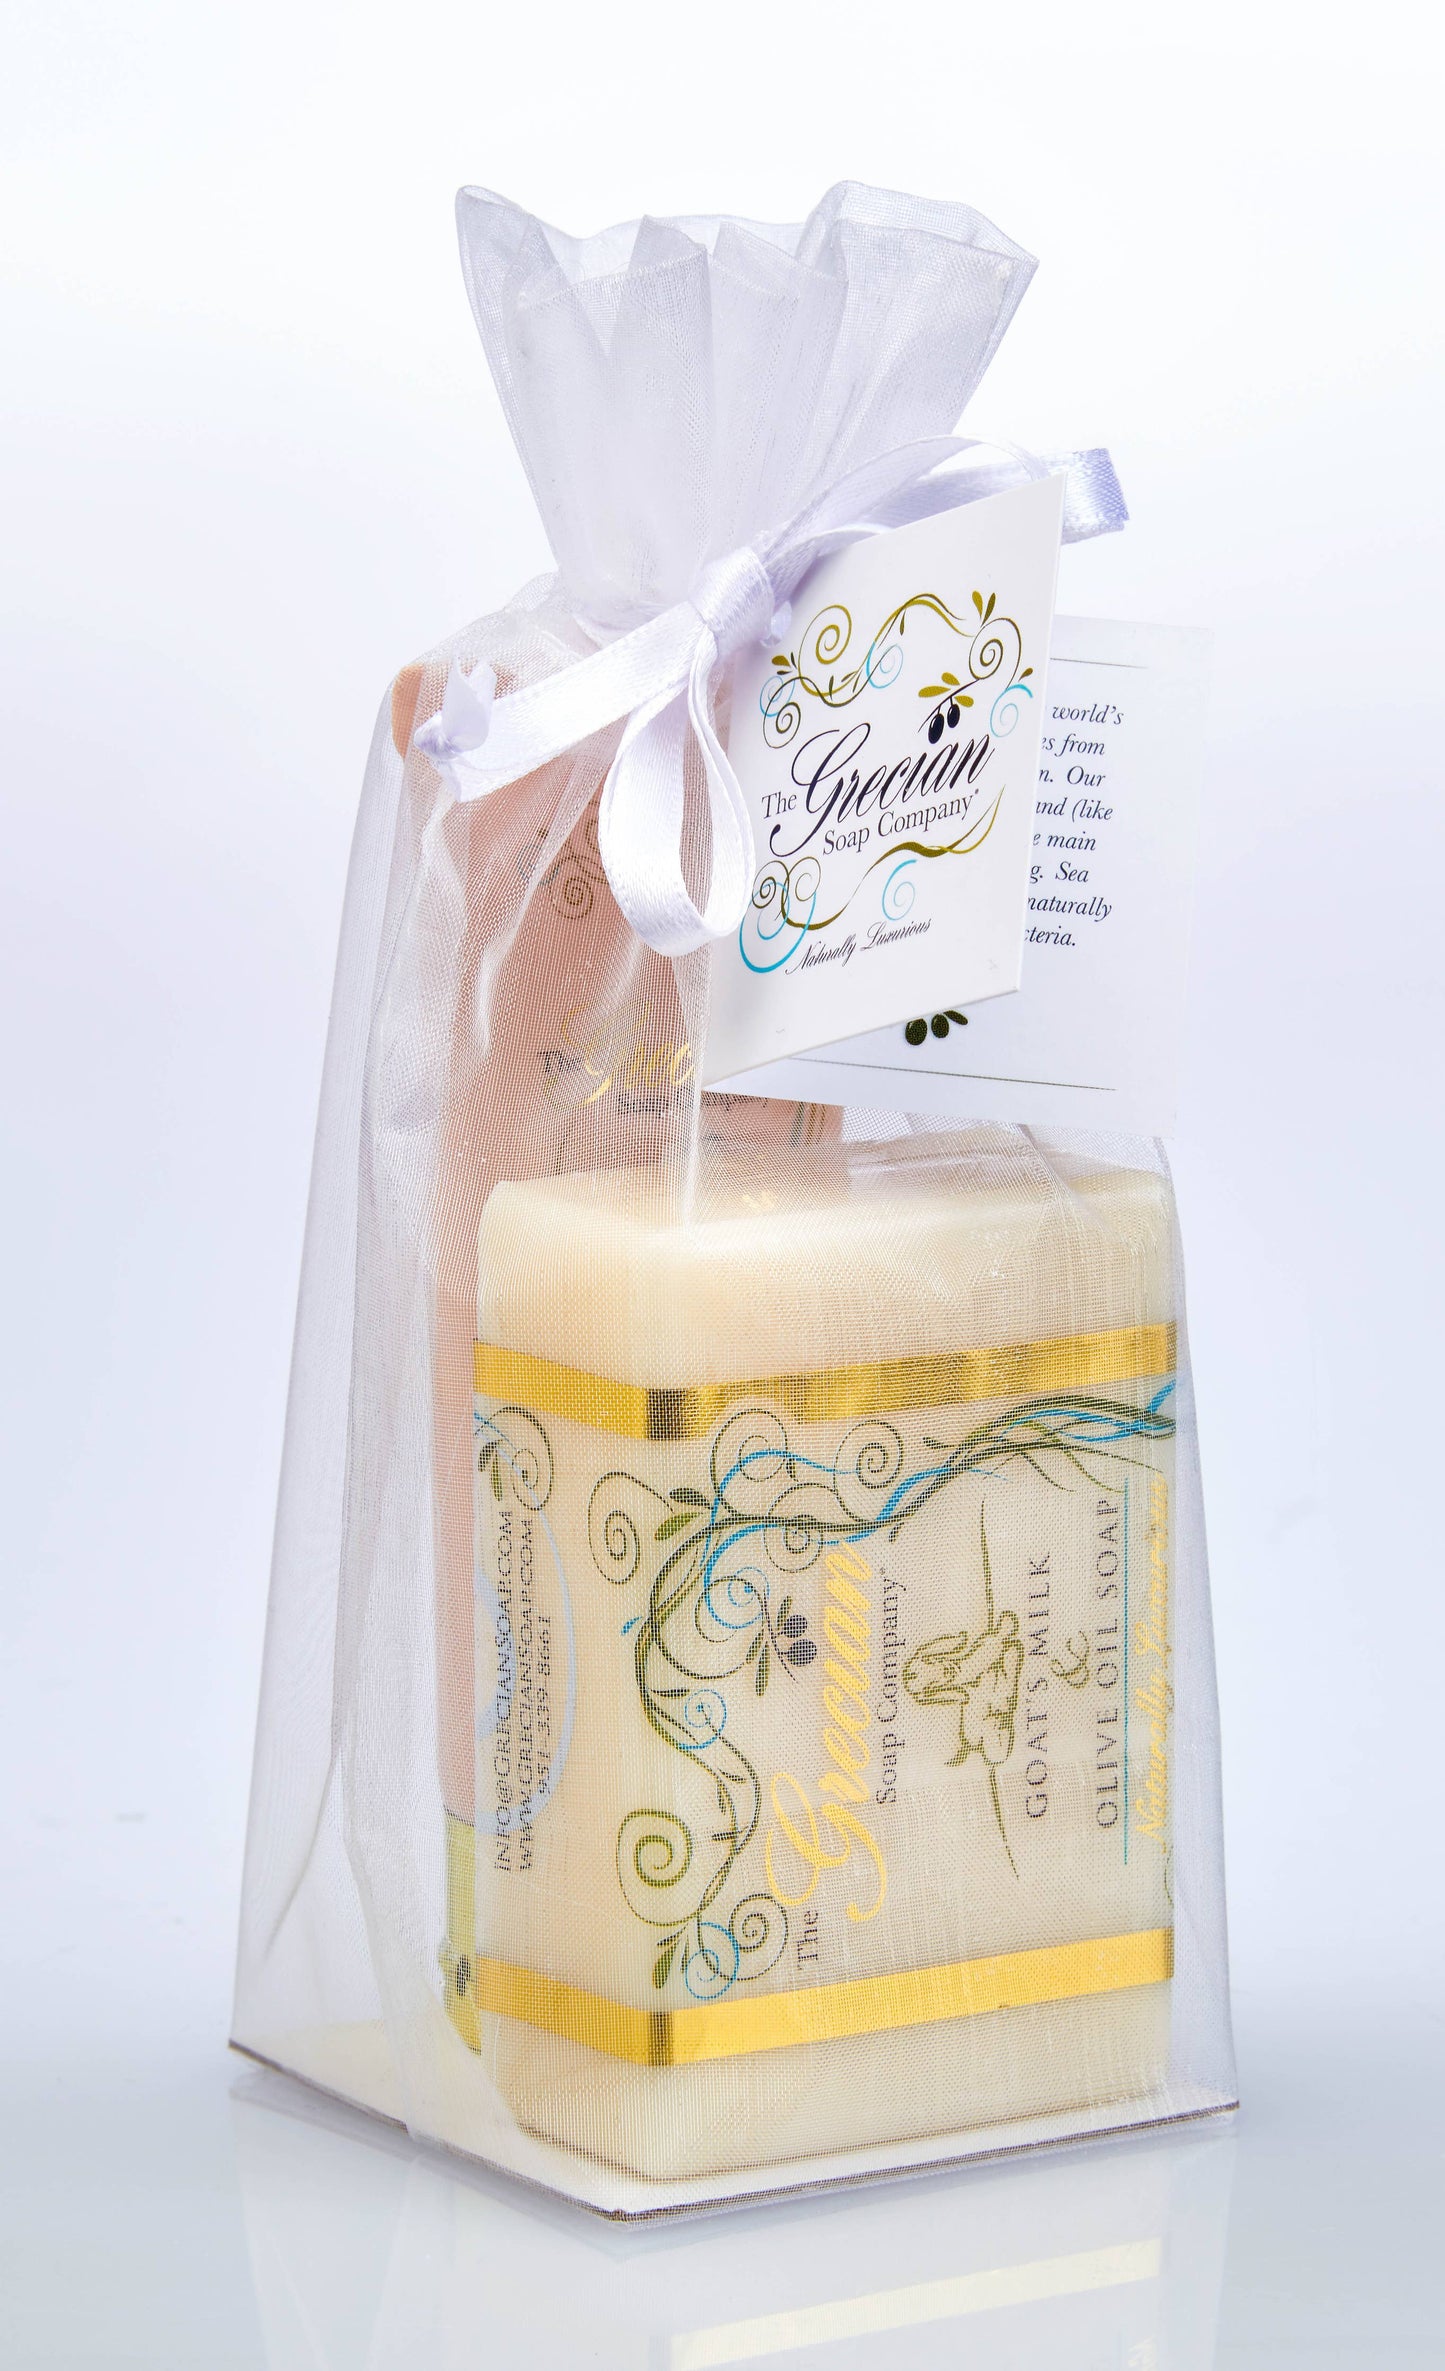 Goat's Milk Soap and Lotion Gift Set